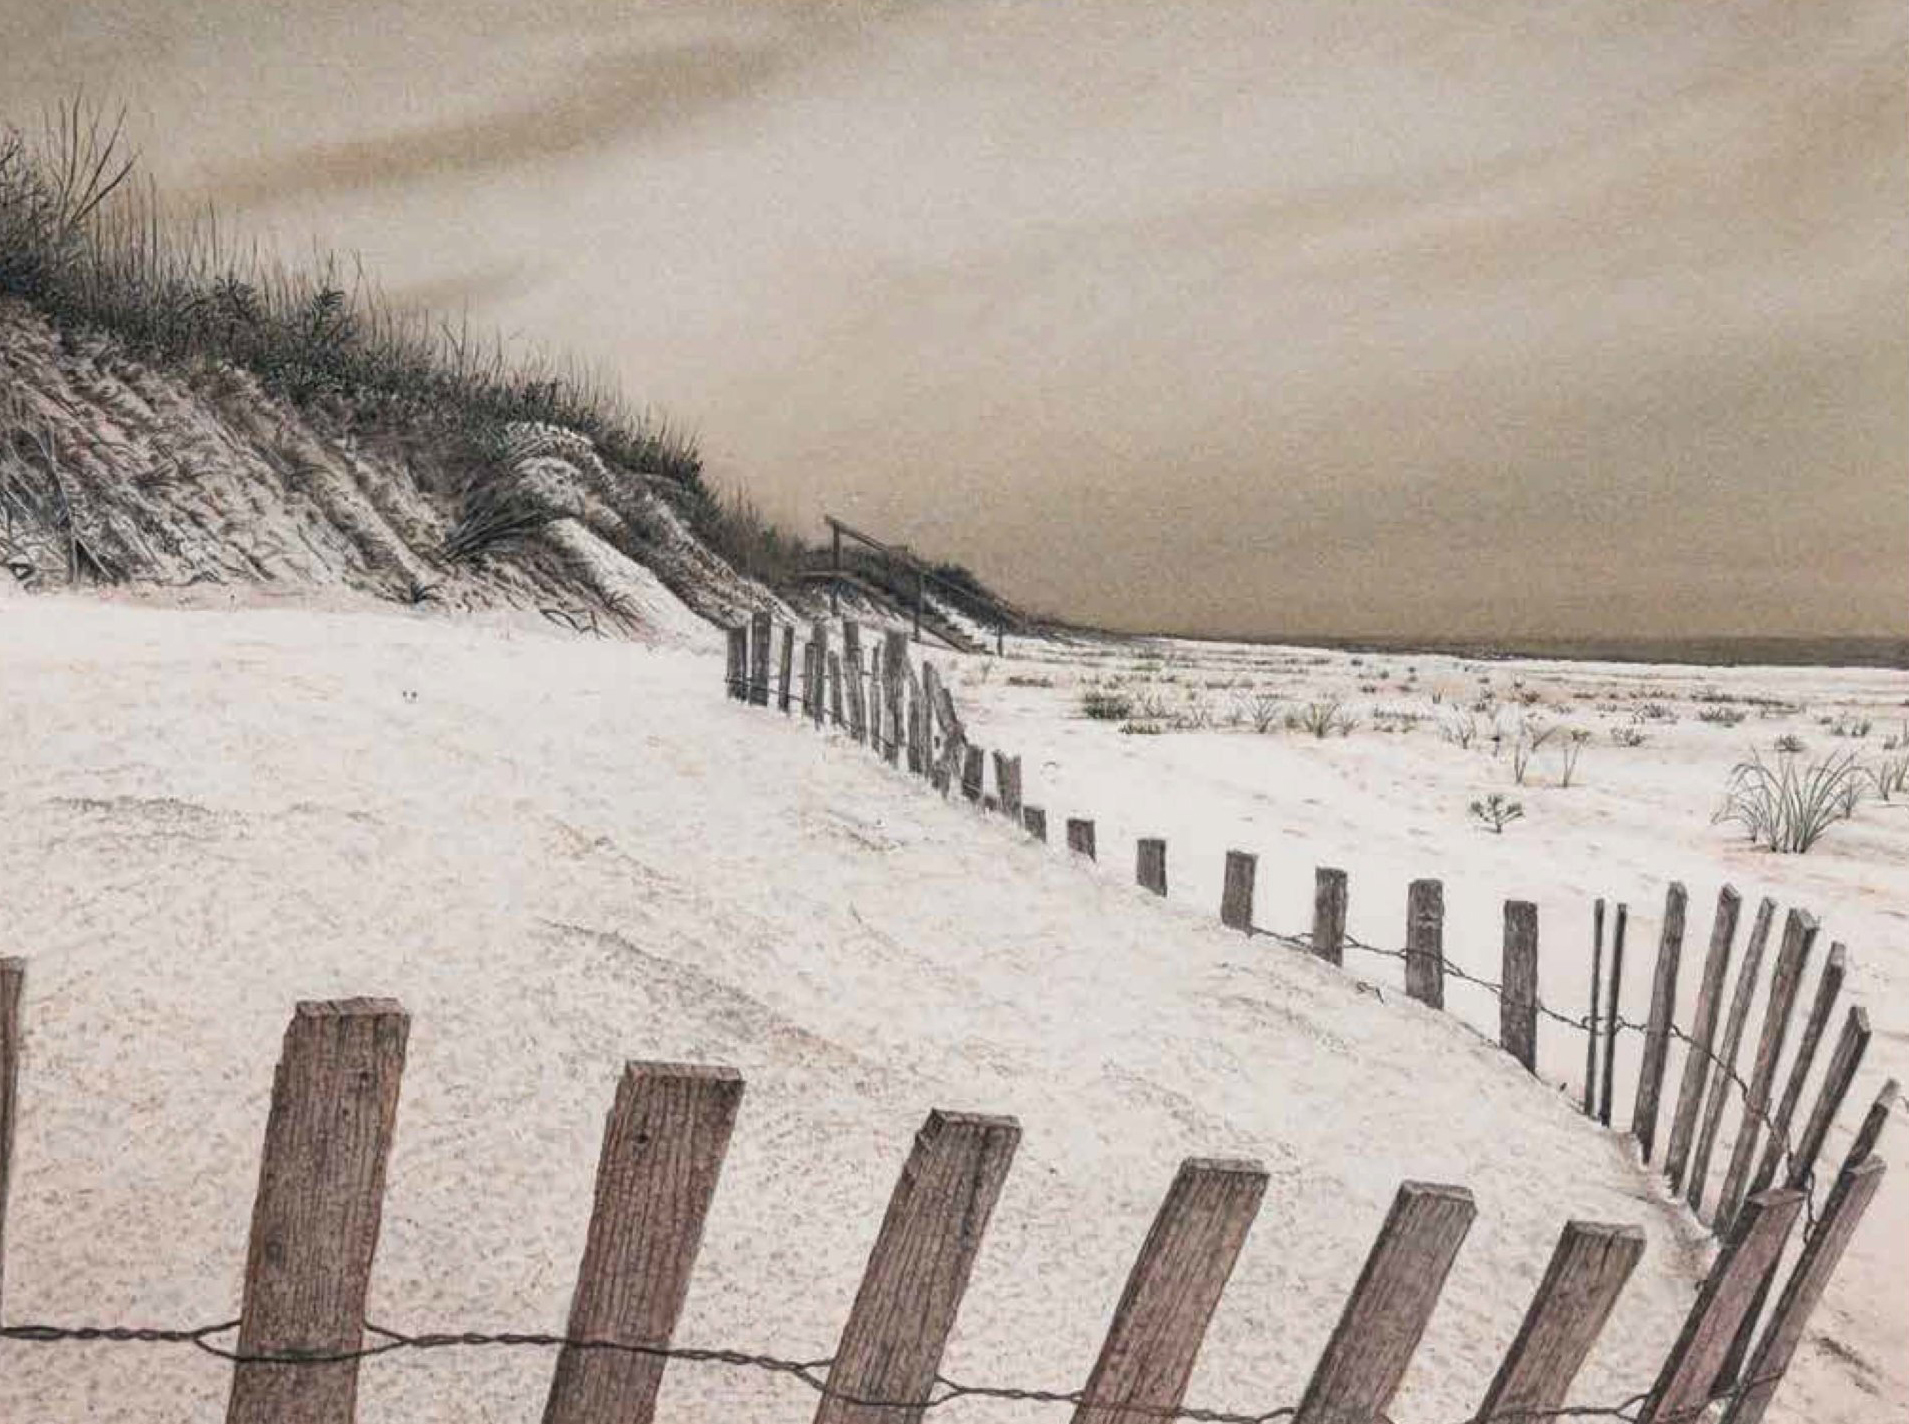 August 12, 2022 Dan's Papers cover painting, “Southampton Dune” by Howard Stern